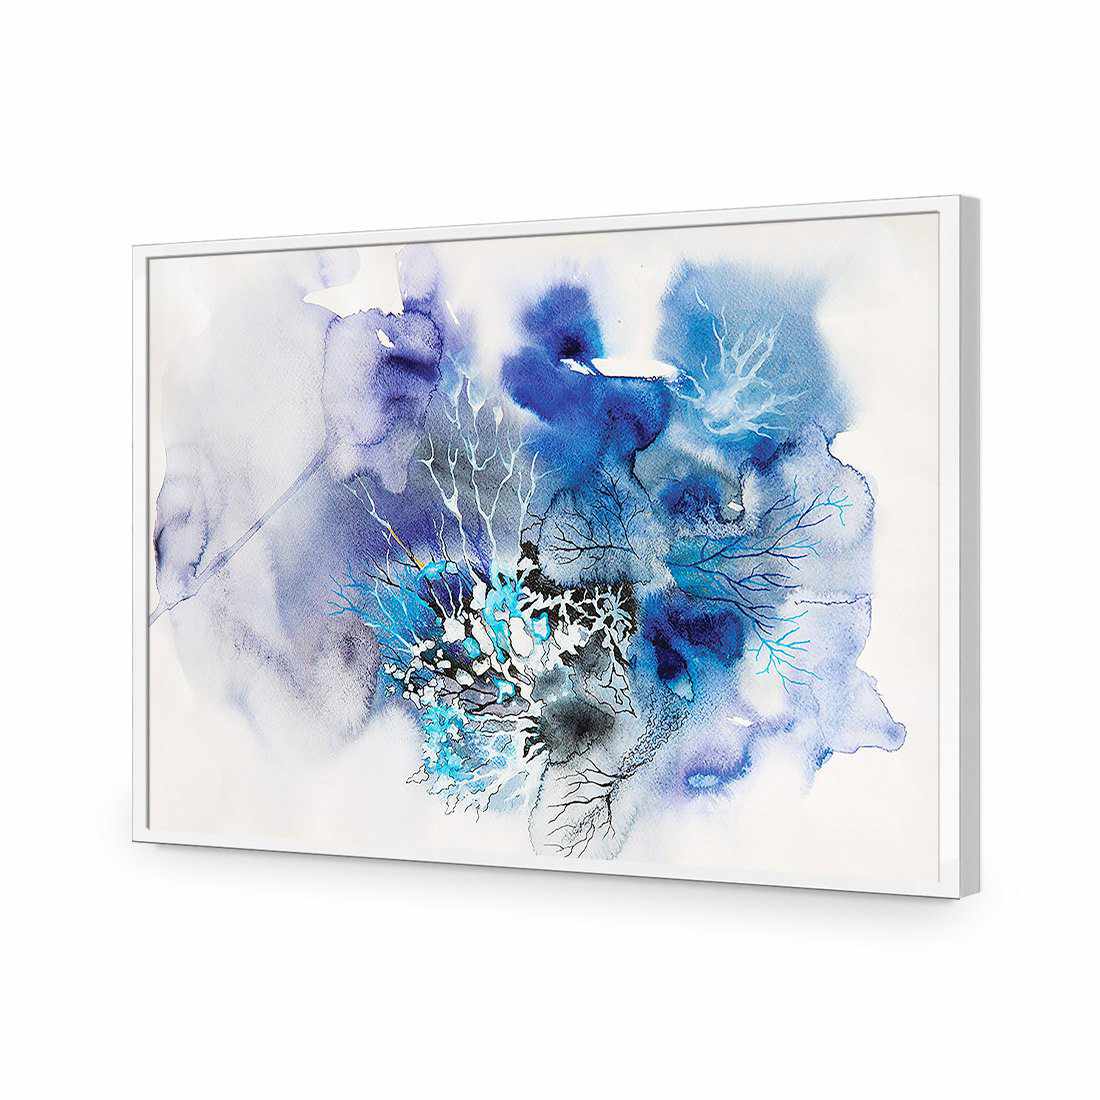 Veins Of Life, Blue-Acrylic-Wall Art Design-Without Border-Acrylic - White Frame-45x30cm-Wall Art Designs